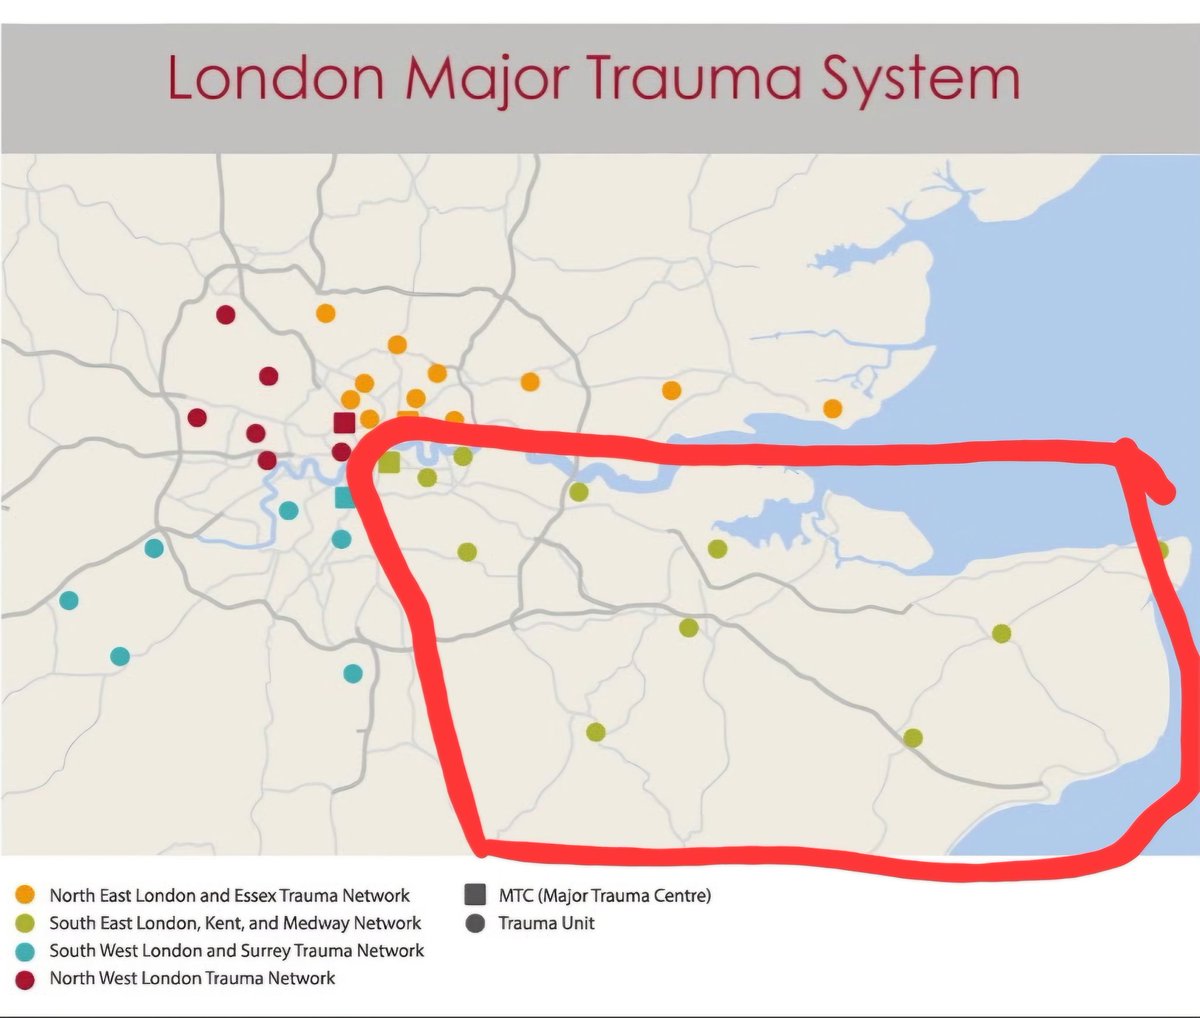 Wonder if any other G7+P5 developed European nation would be embarrassed if they couldn't afford to staff a Major Trauma Centre that covers a 1/4 of their nation's capital city and some of their wealthiest counties? ~4.5 million population covered by 2 trauma surgeons now.